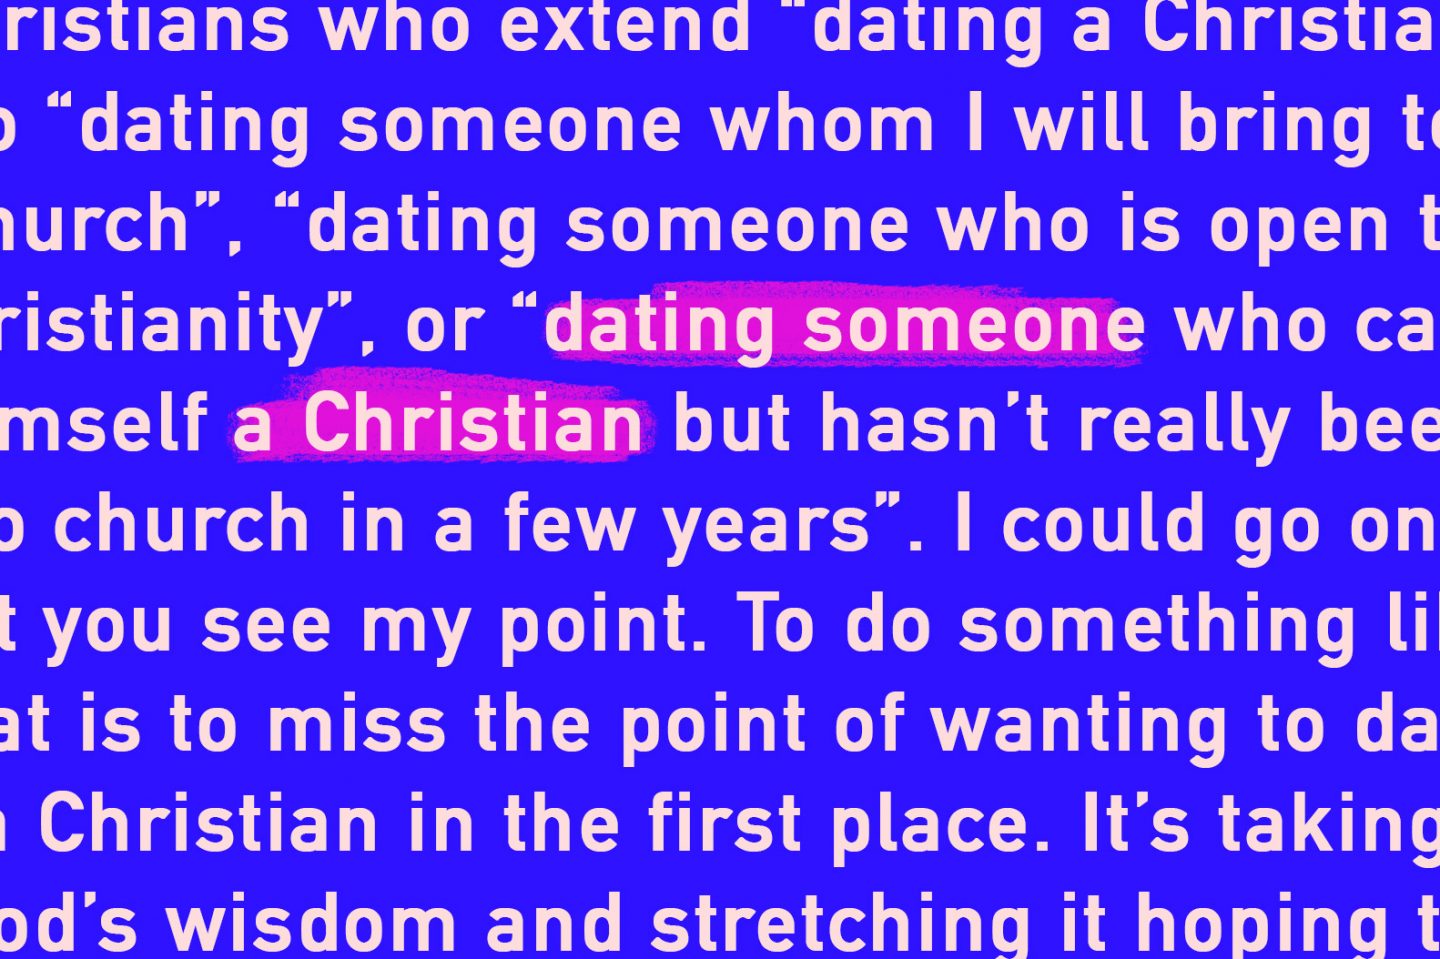 Why can't Christians date nonChristians?